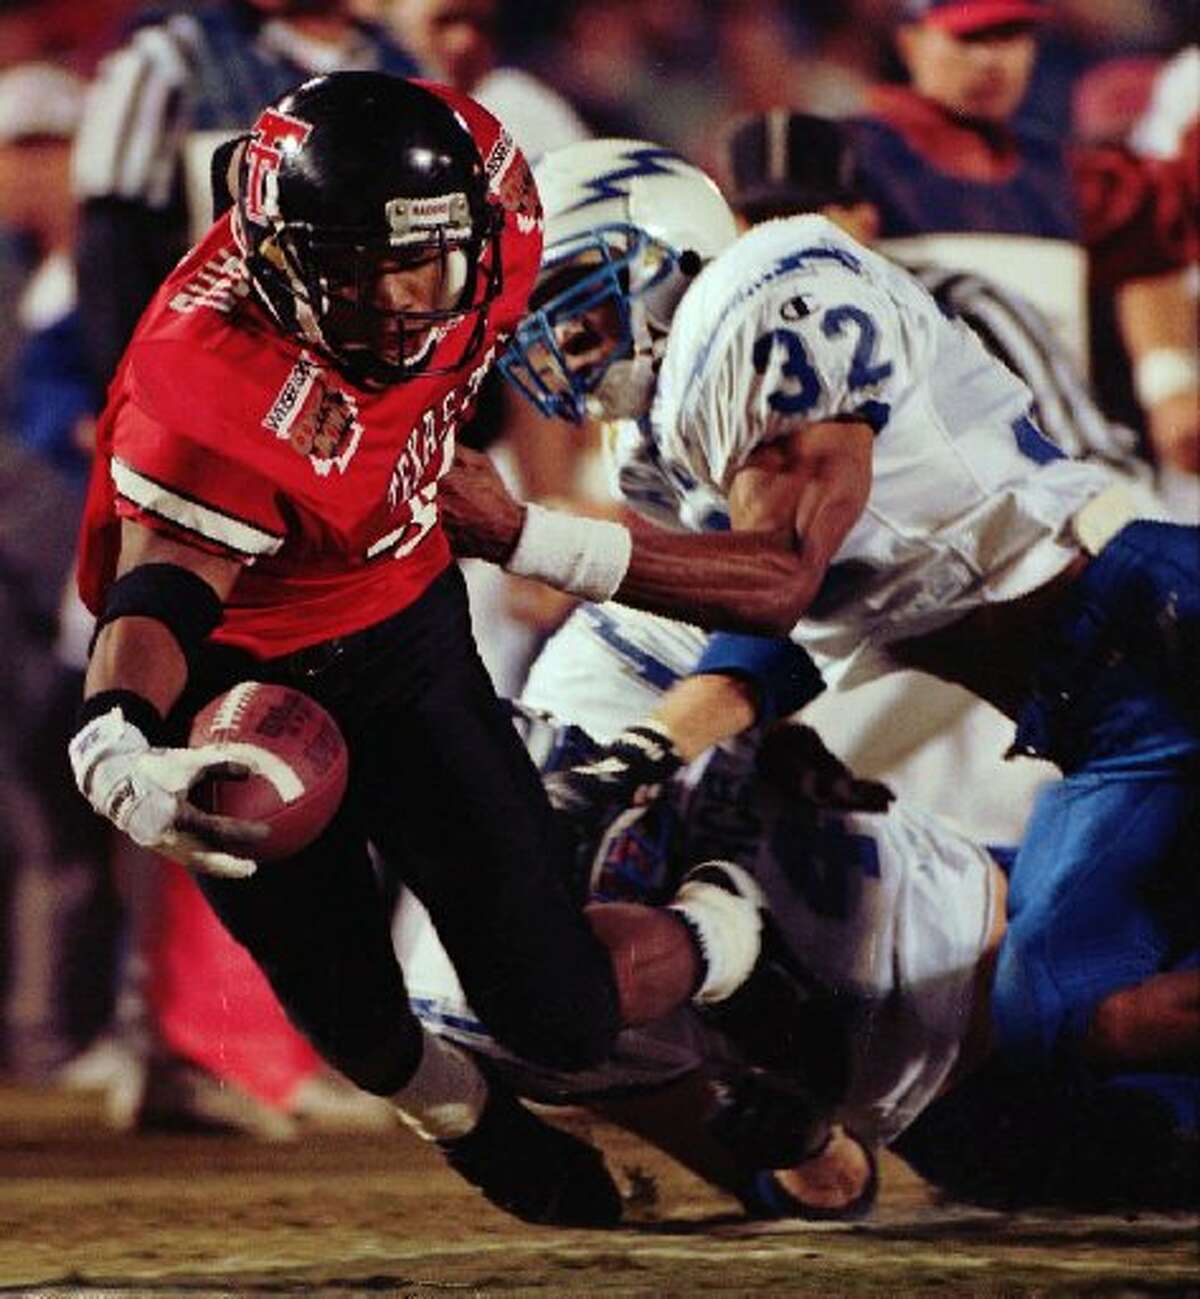 Texas Tech's Byron Hanspard (4) is tackled by Air Force's LeRon Hudgins (32) in early Copper Bowl action at Arizona Stadium in Tucson, Ariz., Wednesday, Dec. 27, 1995. Texas Tech downed the Falcon's 55-41.(AP Photo/Scott Troyanos)